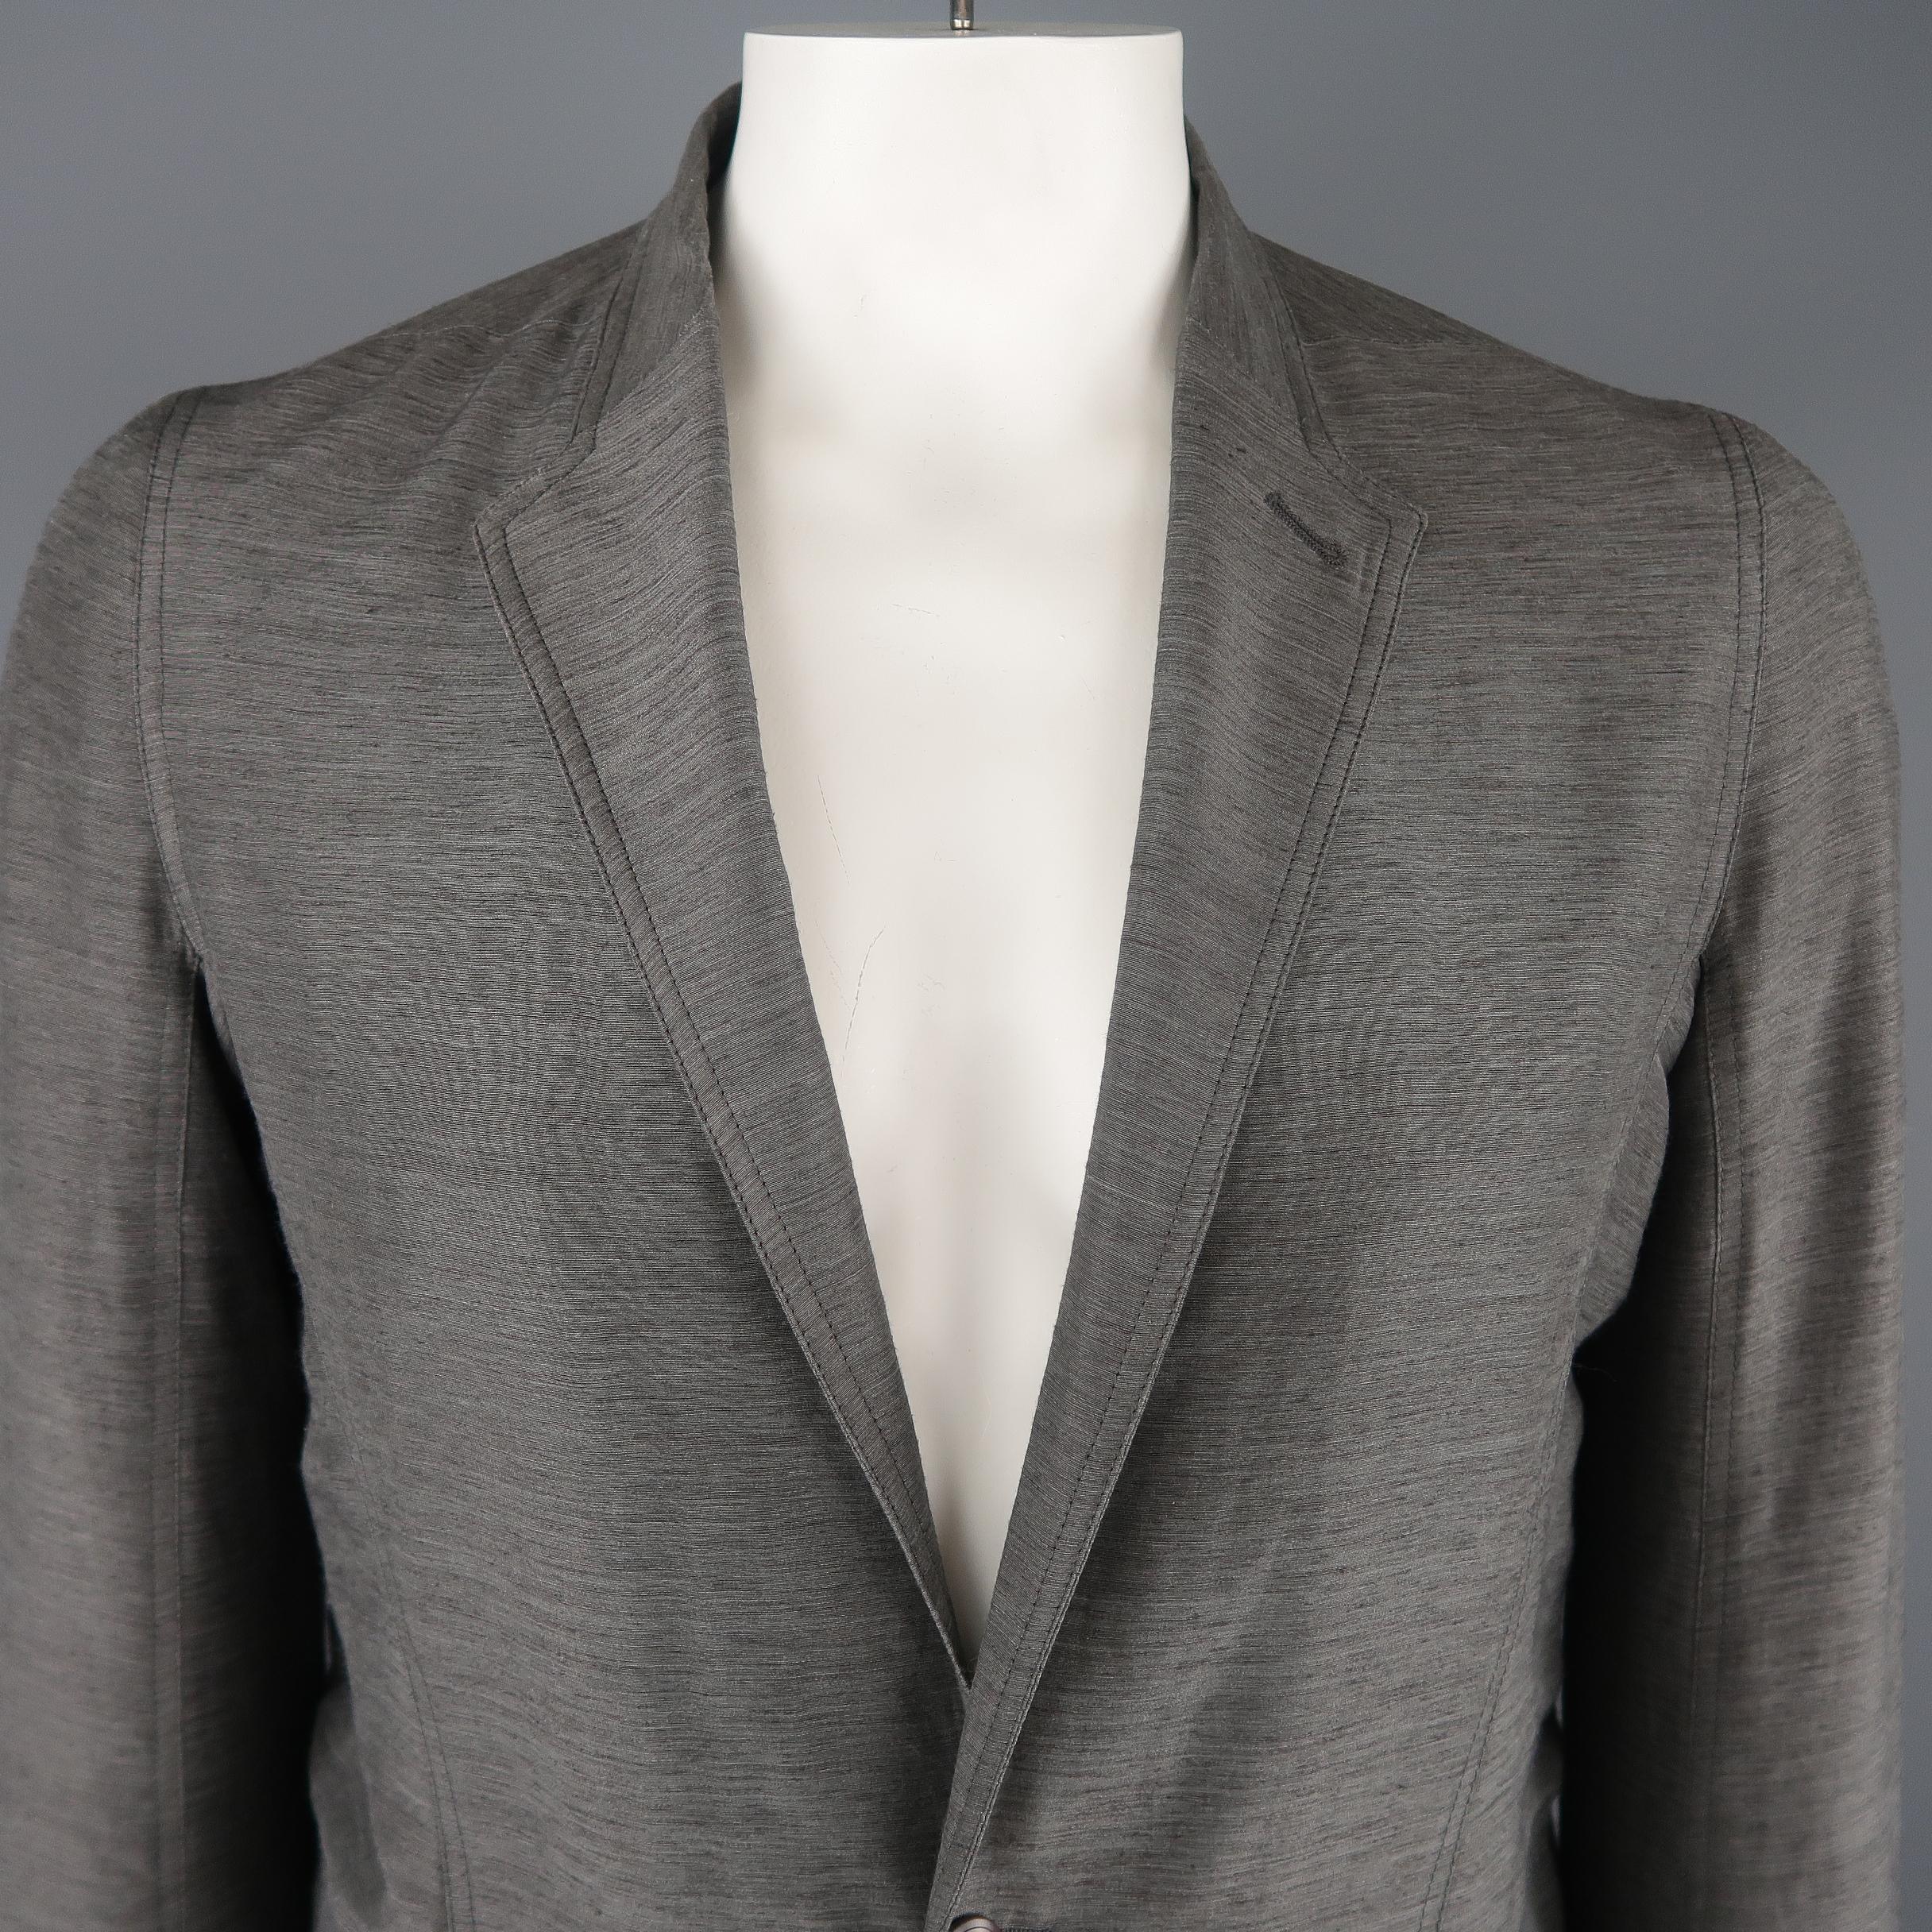 RICK OWENS Spring 2014 Collection sport coat comes in a light weight linen, silk, poly blend heathered material with a band collar notch lapel, single button closure, flap pockets, button cuffs, and half liner. small tear on back seam. As-is.  Made